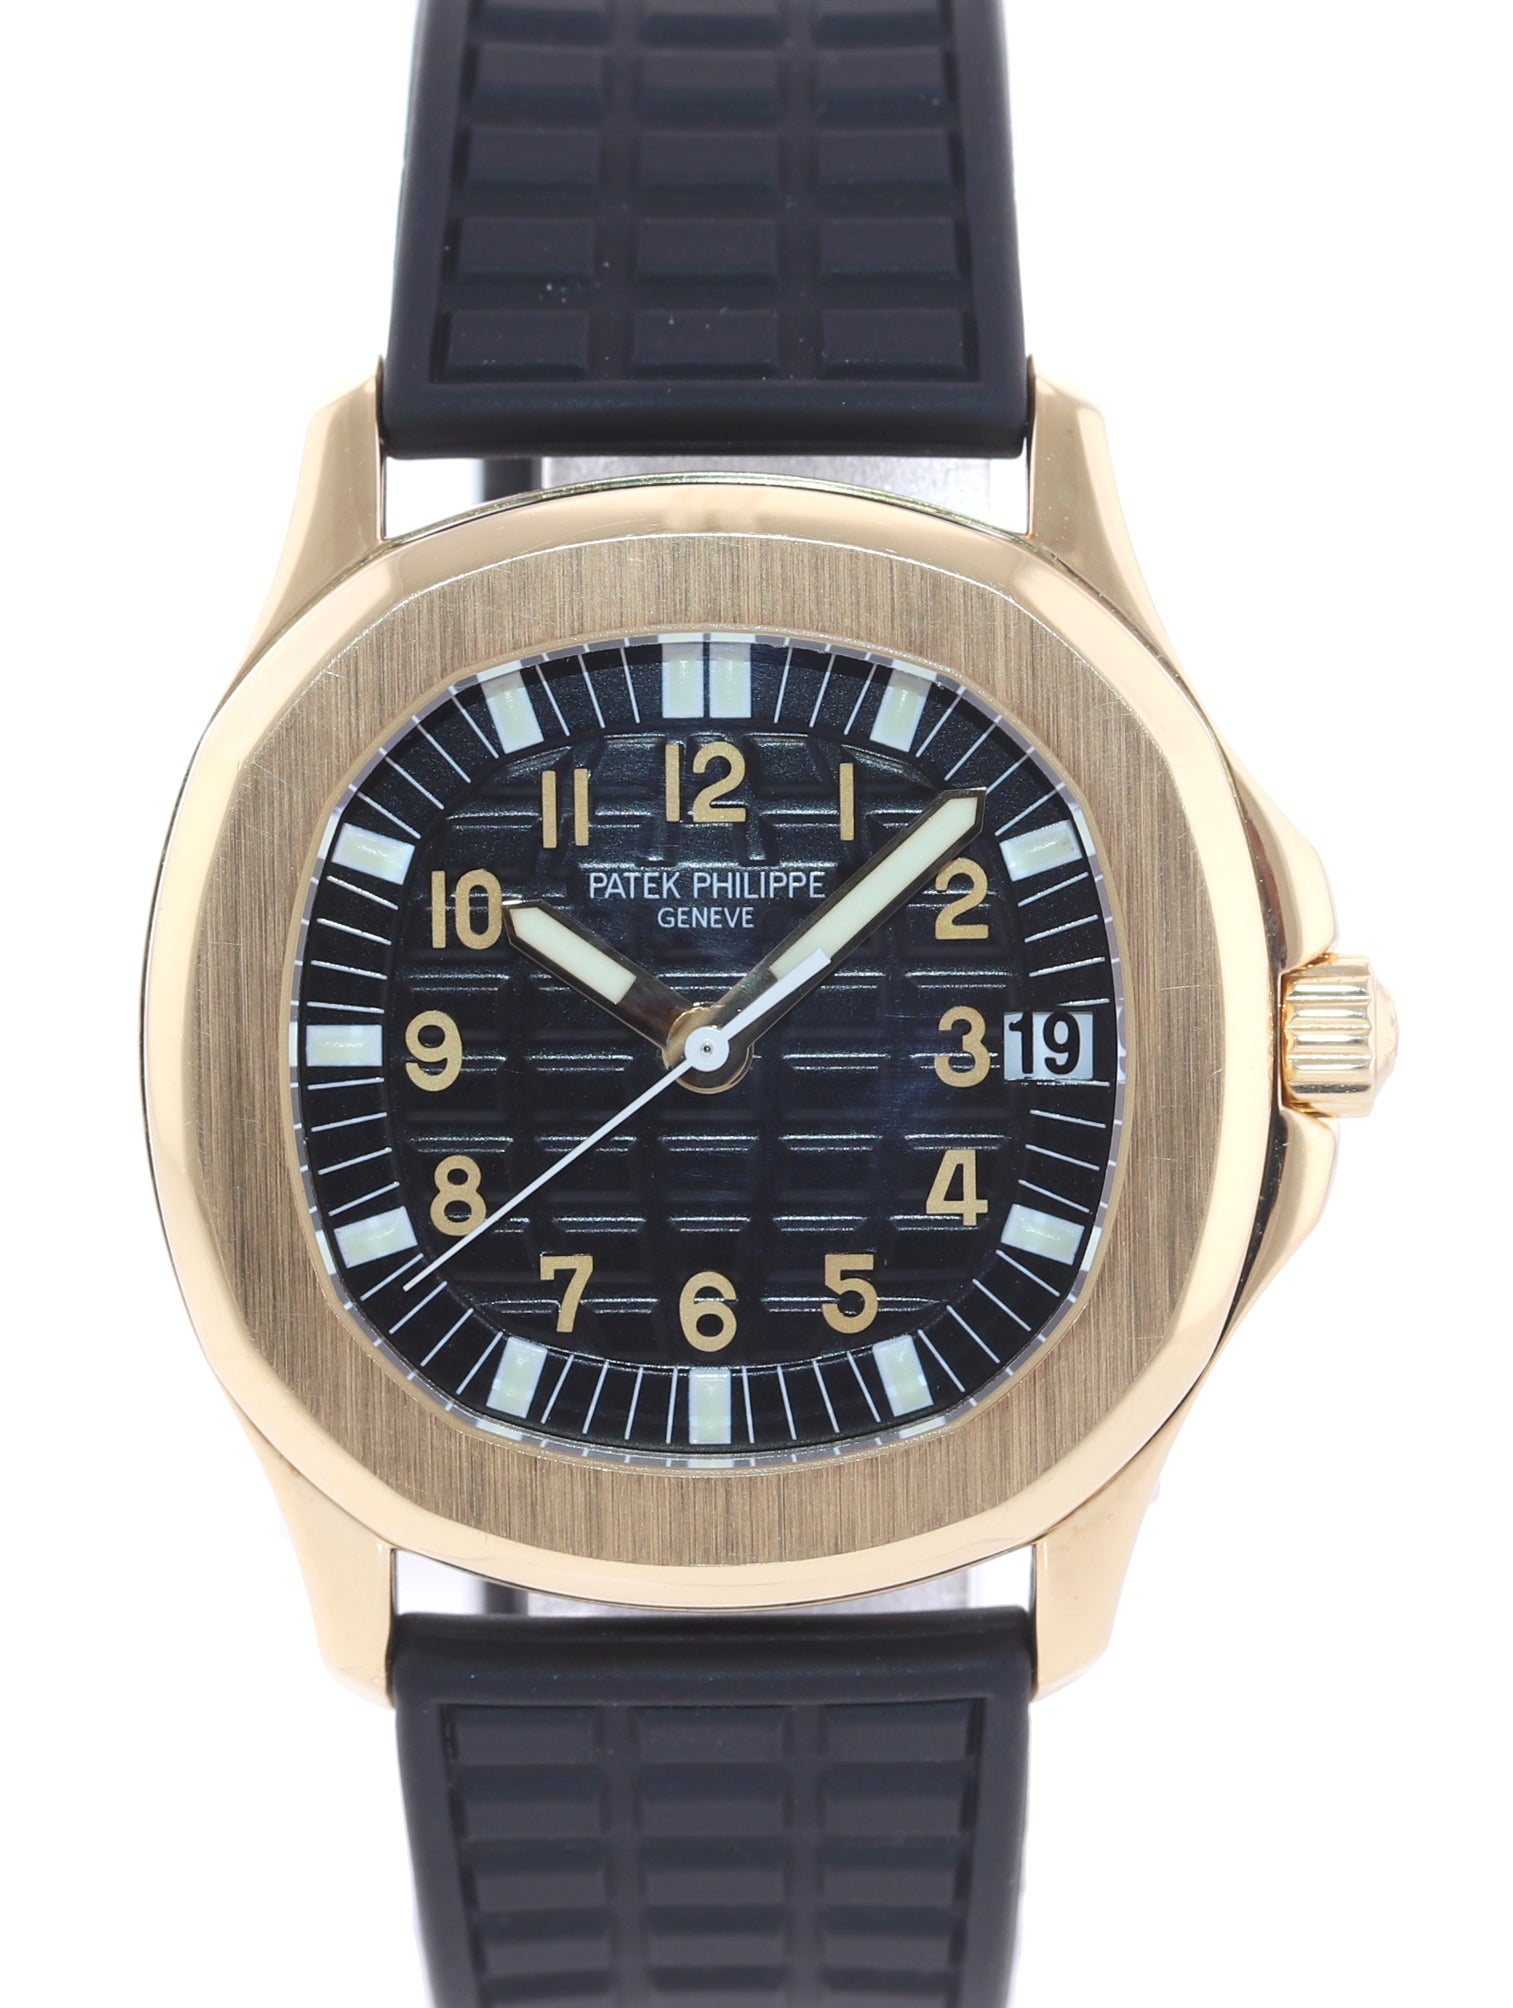 PAPERS Patek Philippe 5066J Aquanaut Black Rubber 5066 Yellow Gold 36mm Watch